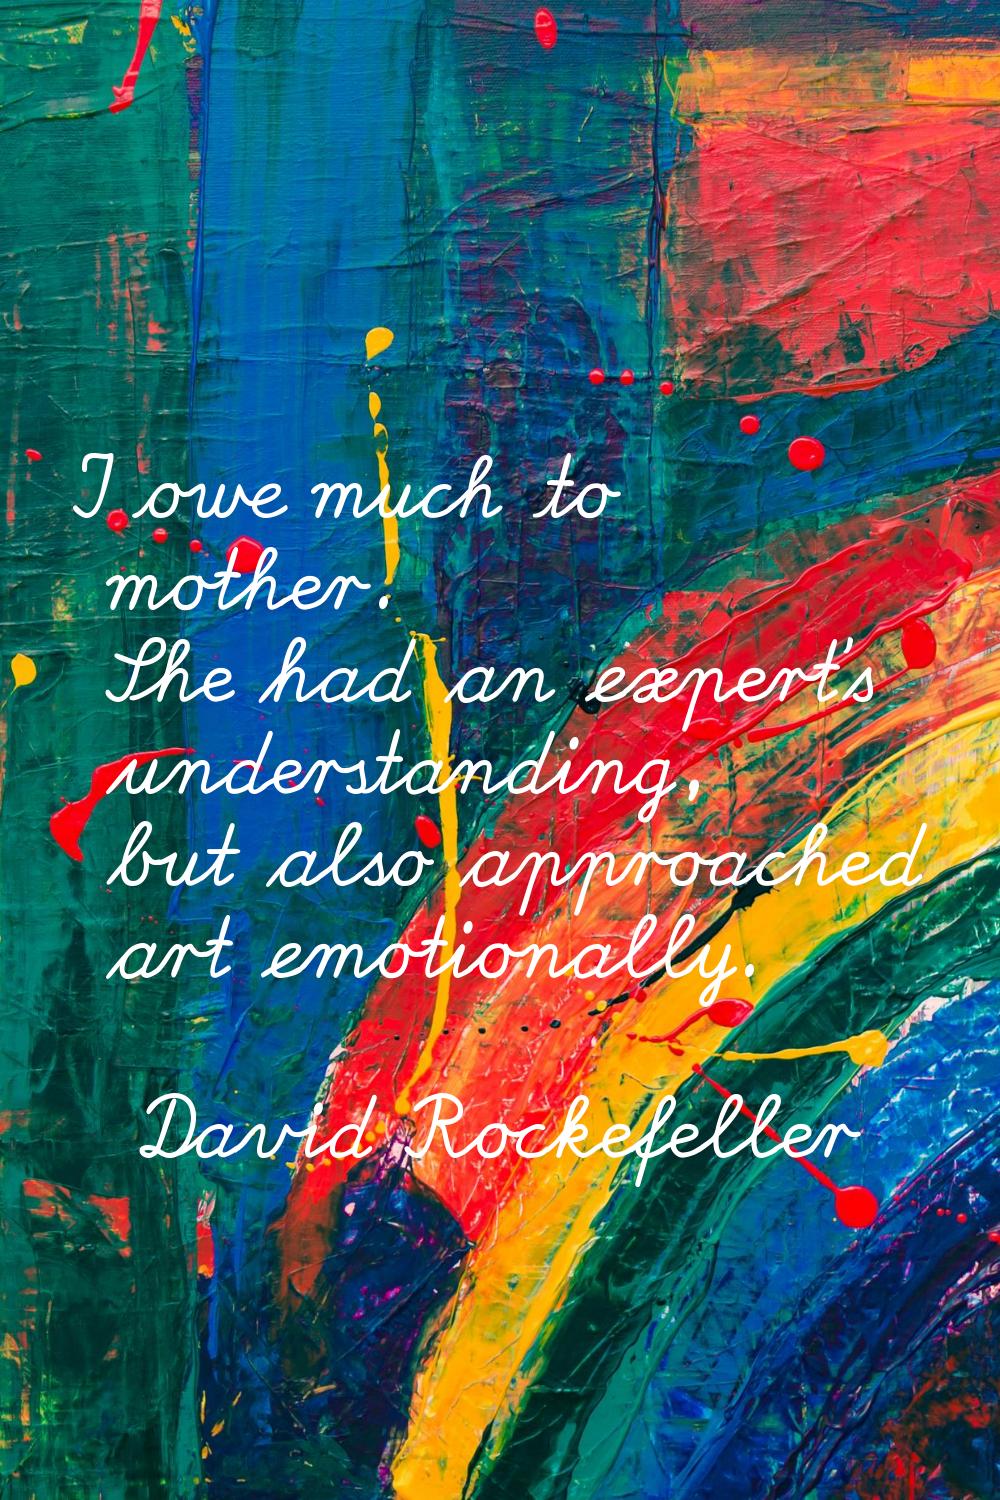 I owe much to mother. She had an expert's understanding, but also approached art emotionally.